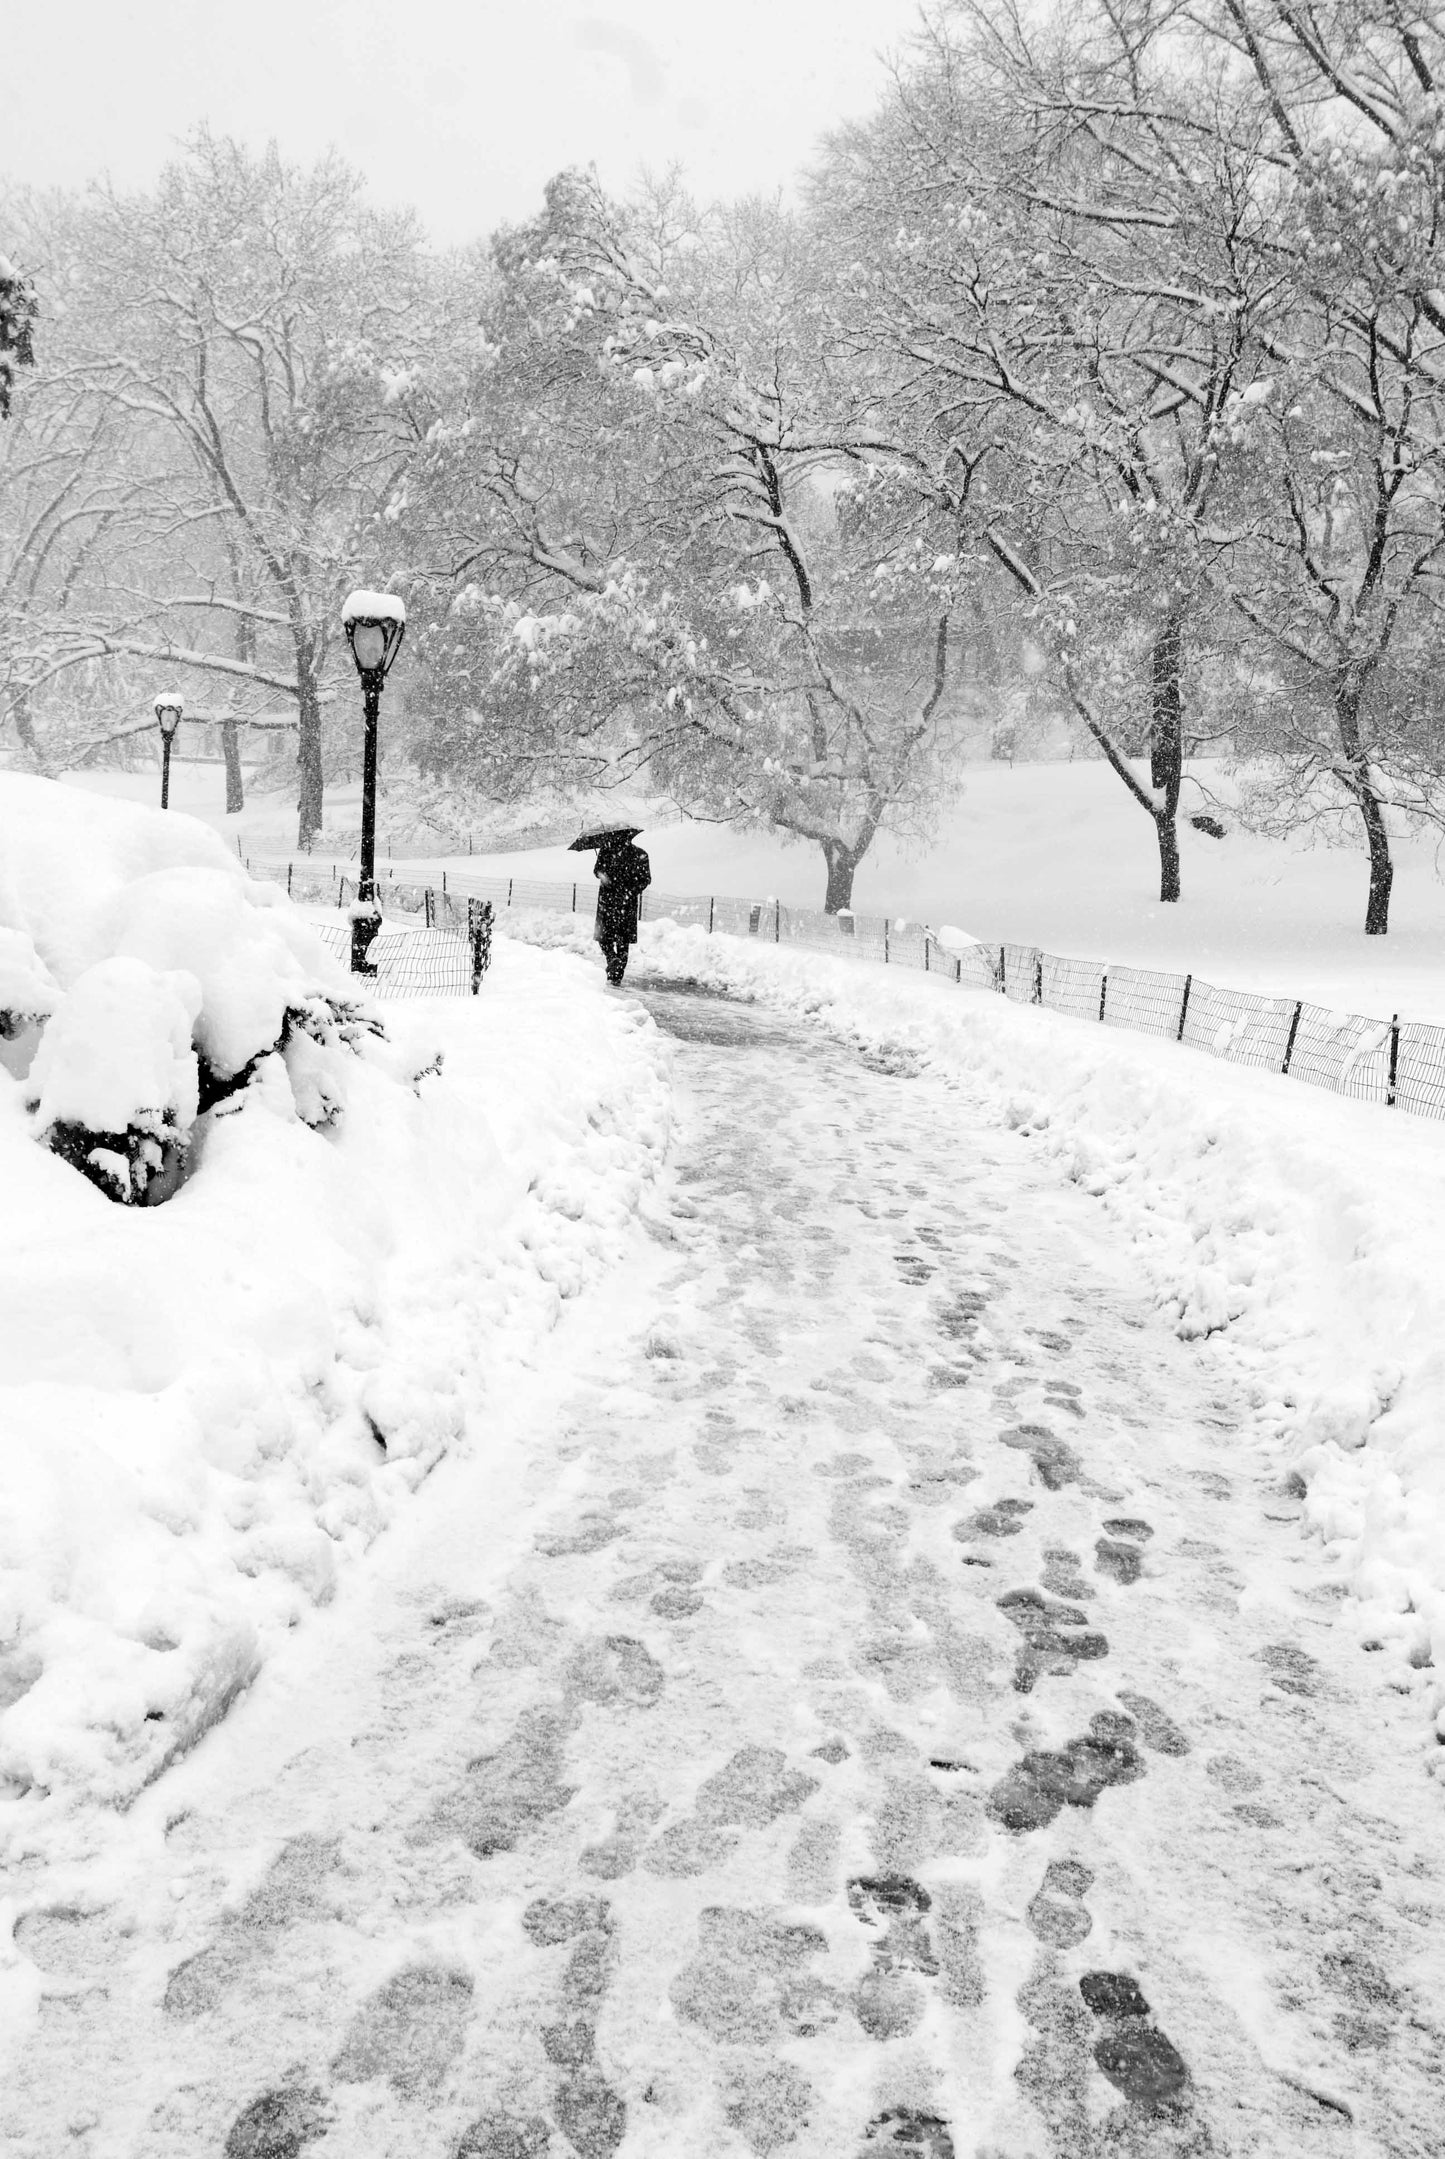 Alessandra Mattanza | GOING FORWARD, Central Park, New York. Braving the winter snows in New Yorks Central Park. Available as an art print or as a photographic print on acrylic glass.